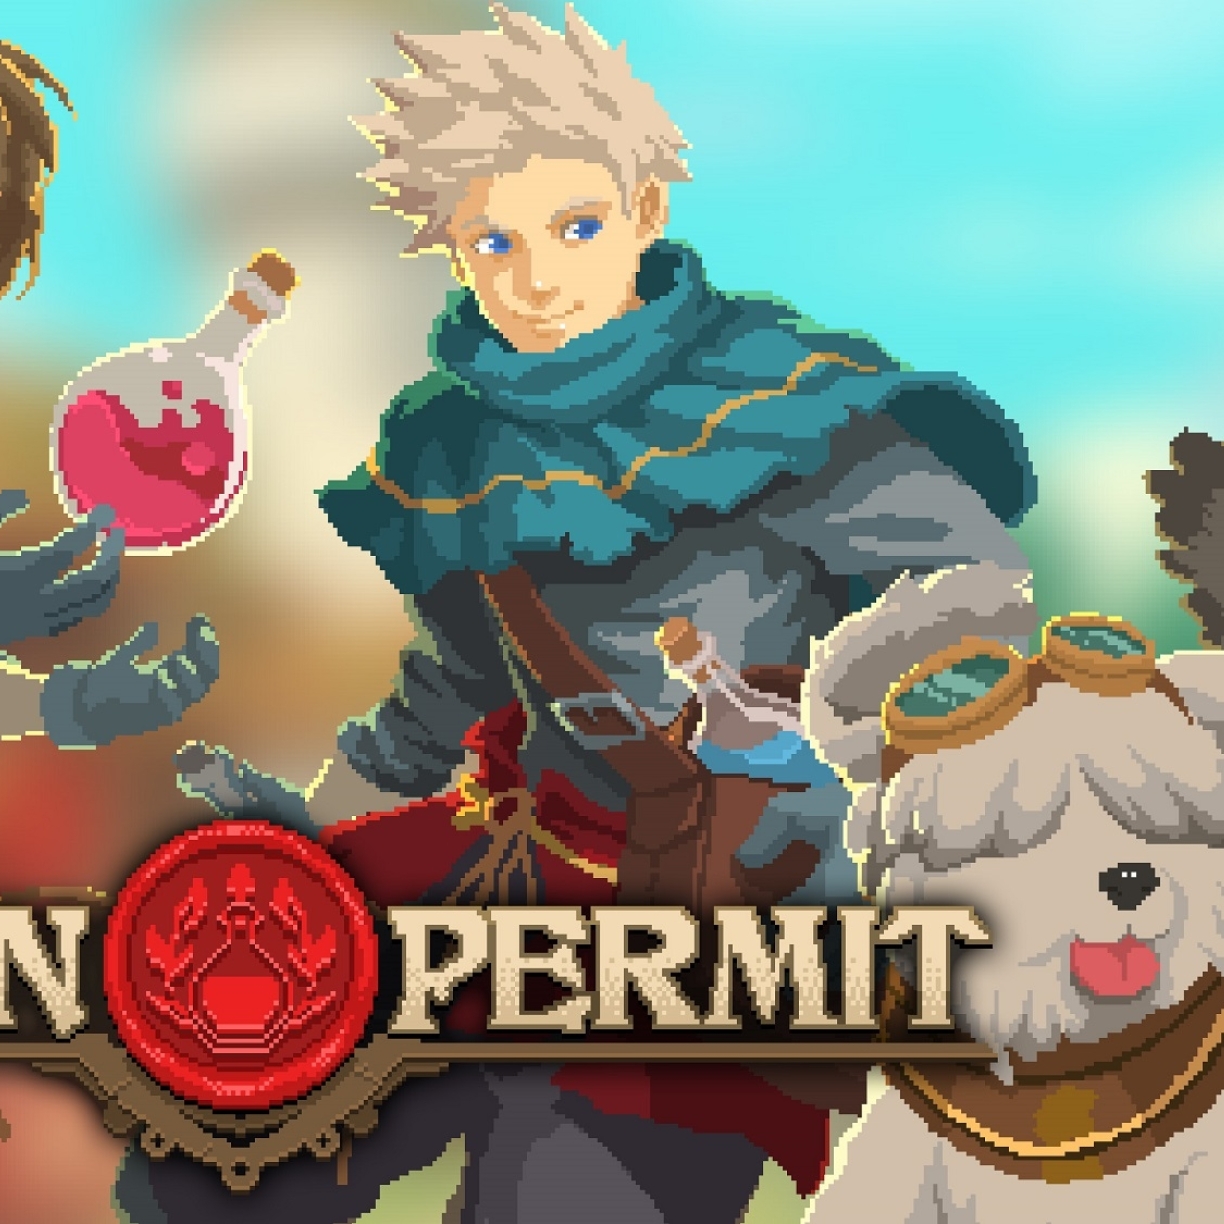 for mac download Potion Permit